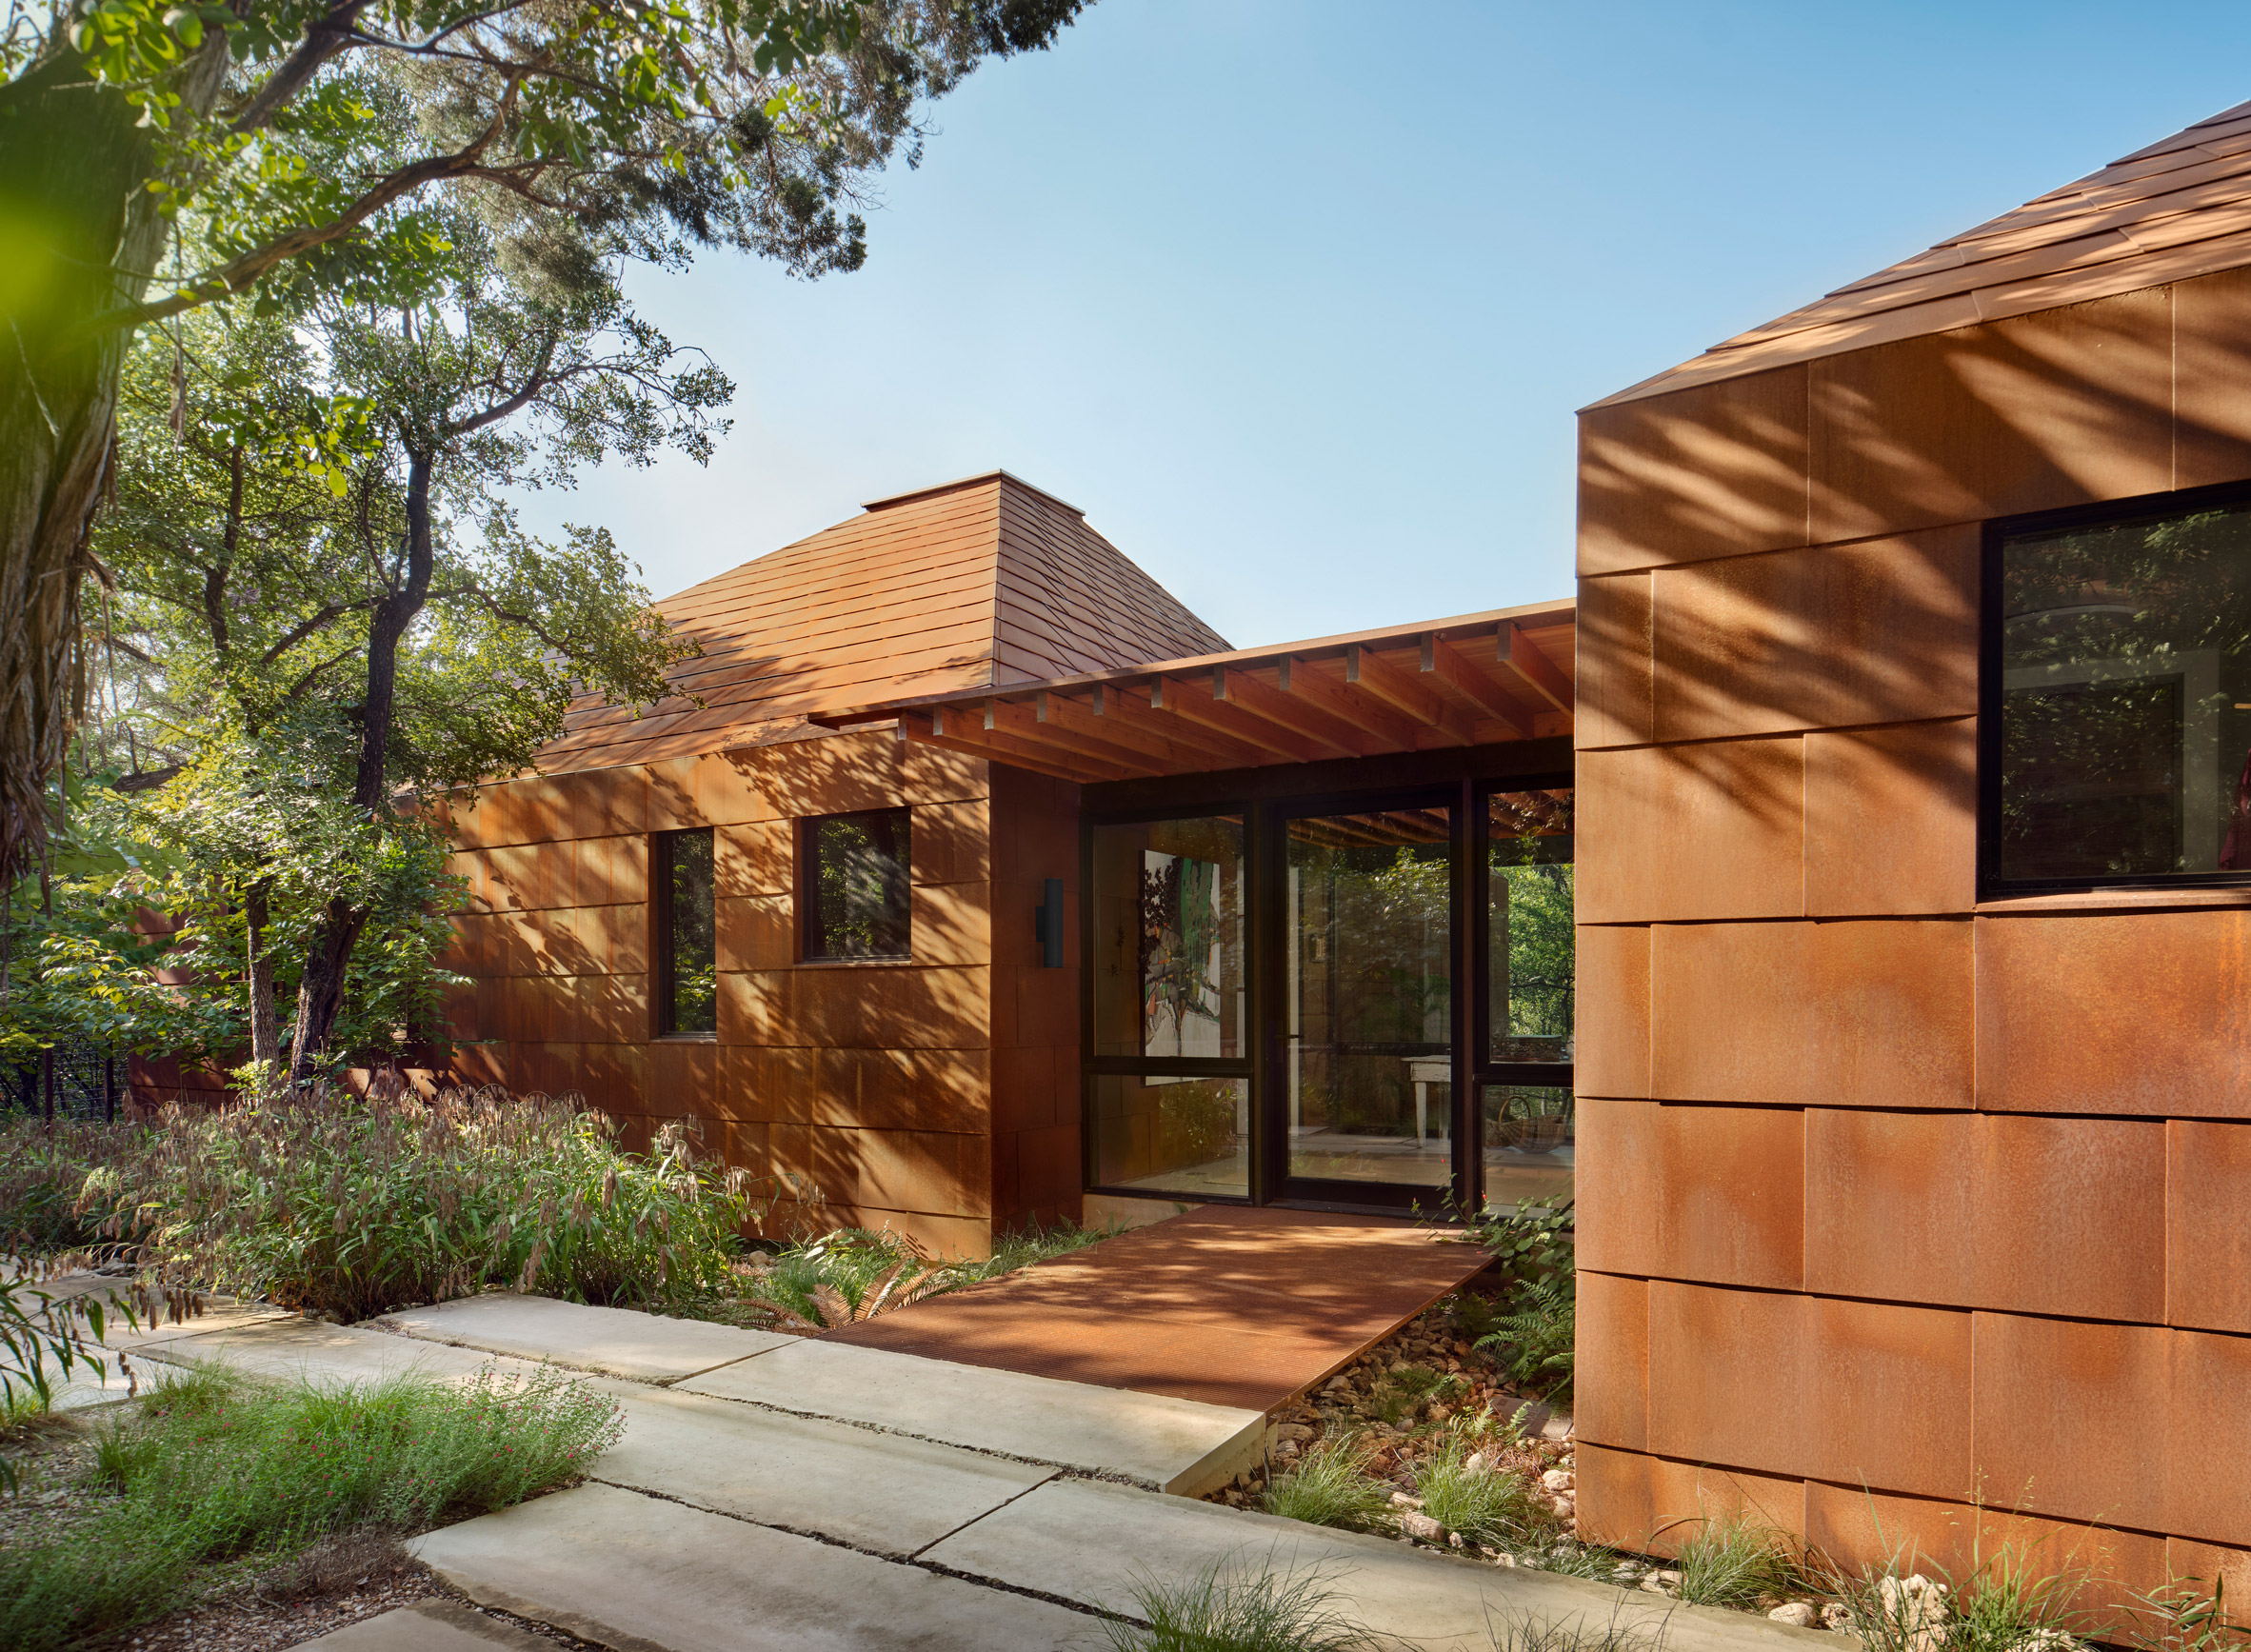 Weathering steel house by Lake Flato Architects